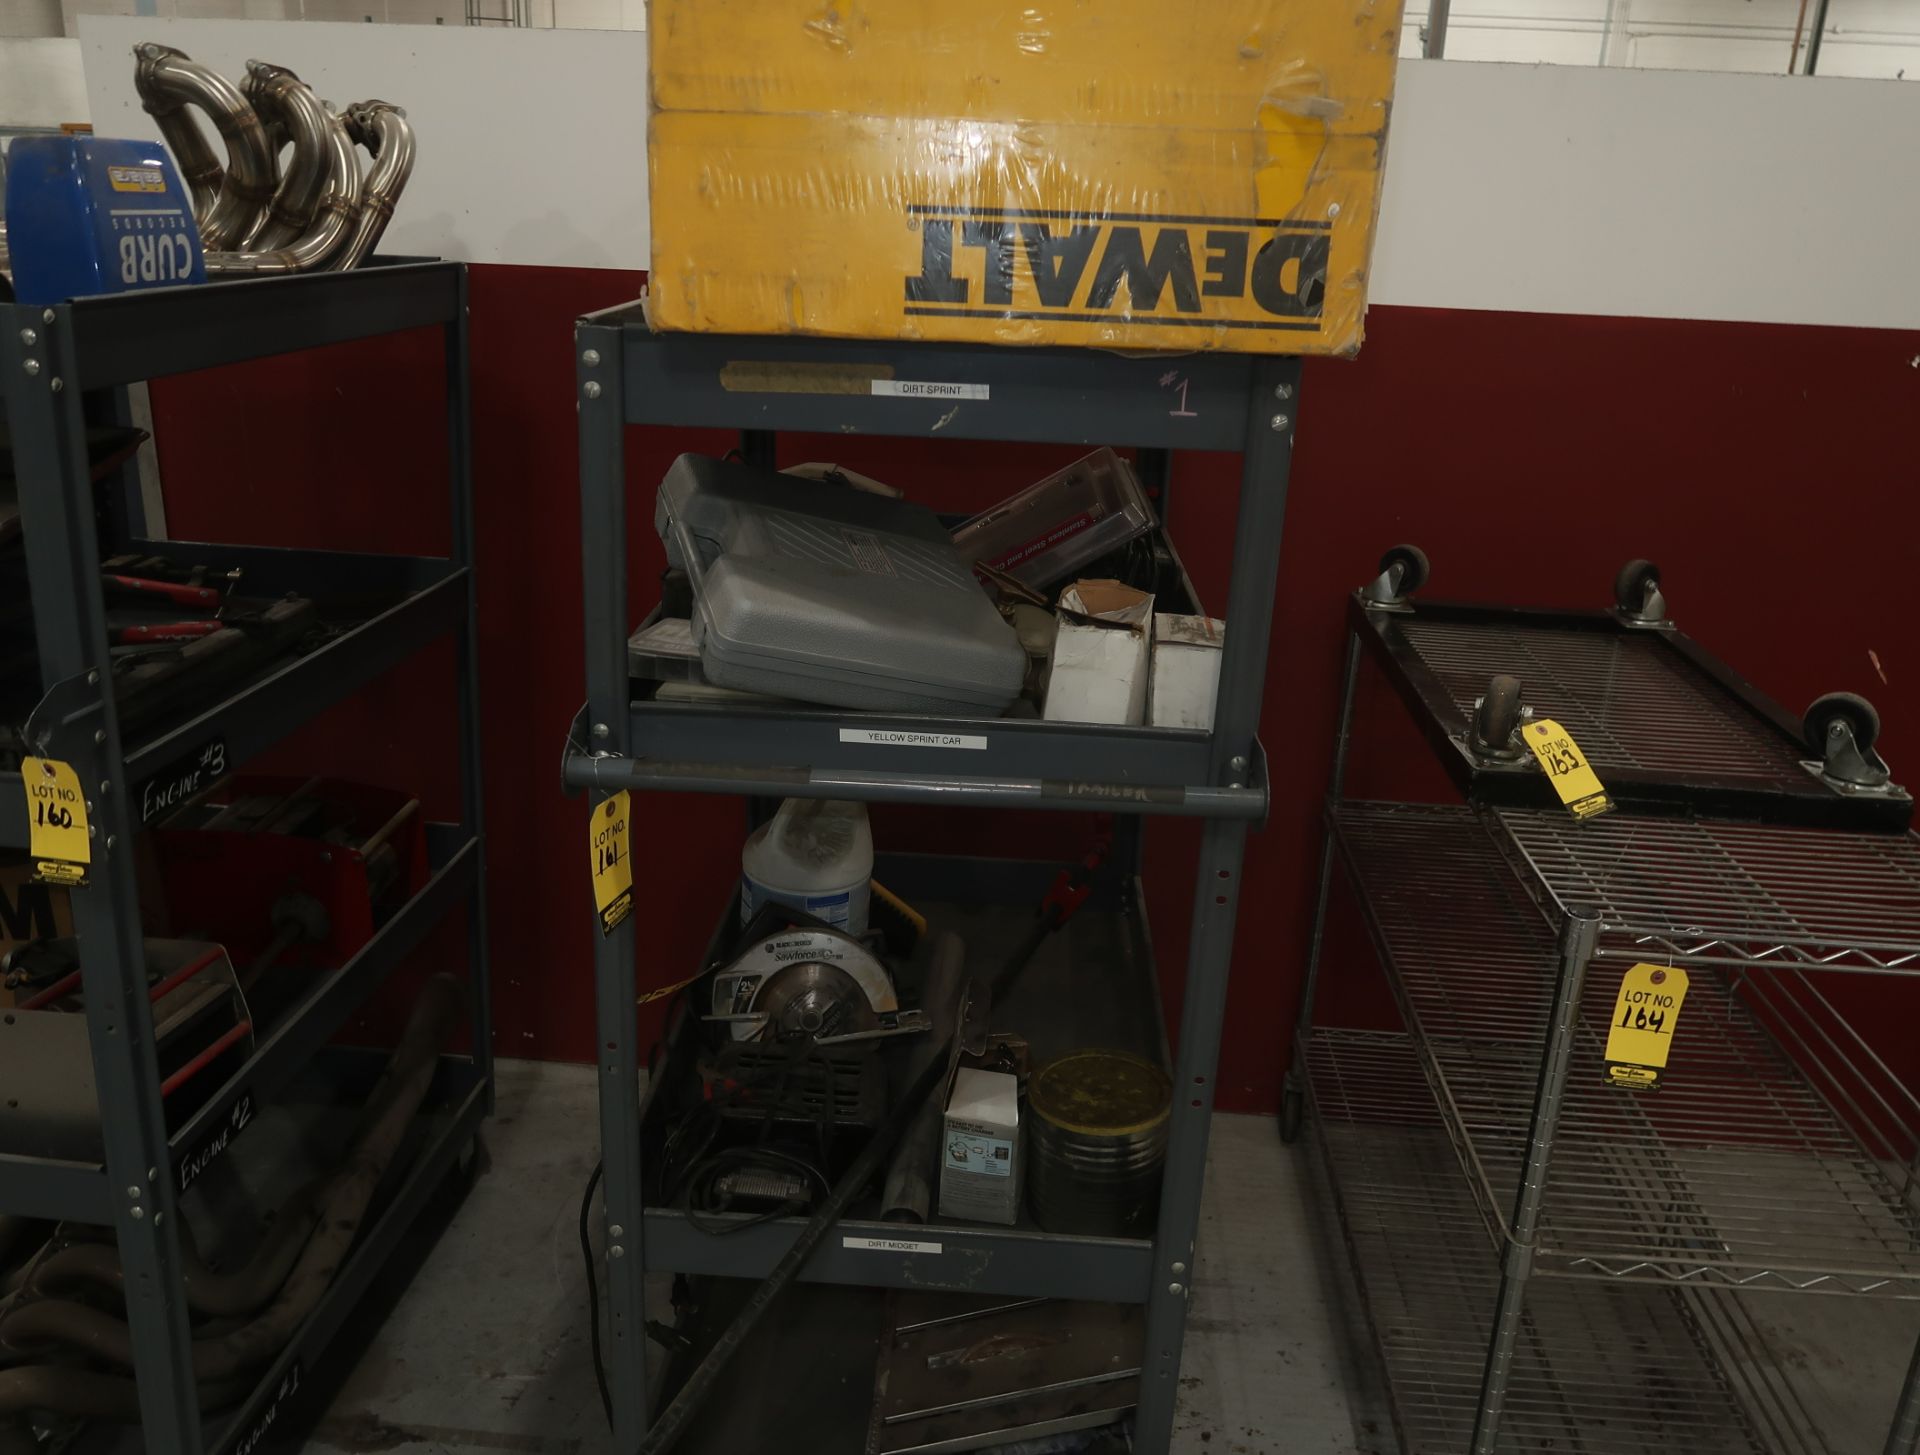 B&D SAWFORCE 2 1/3HP CIRCULAR SAW & OTHER CONTENTS FROM CART (LOT 161) NO CART - Image 2 of 2